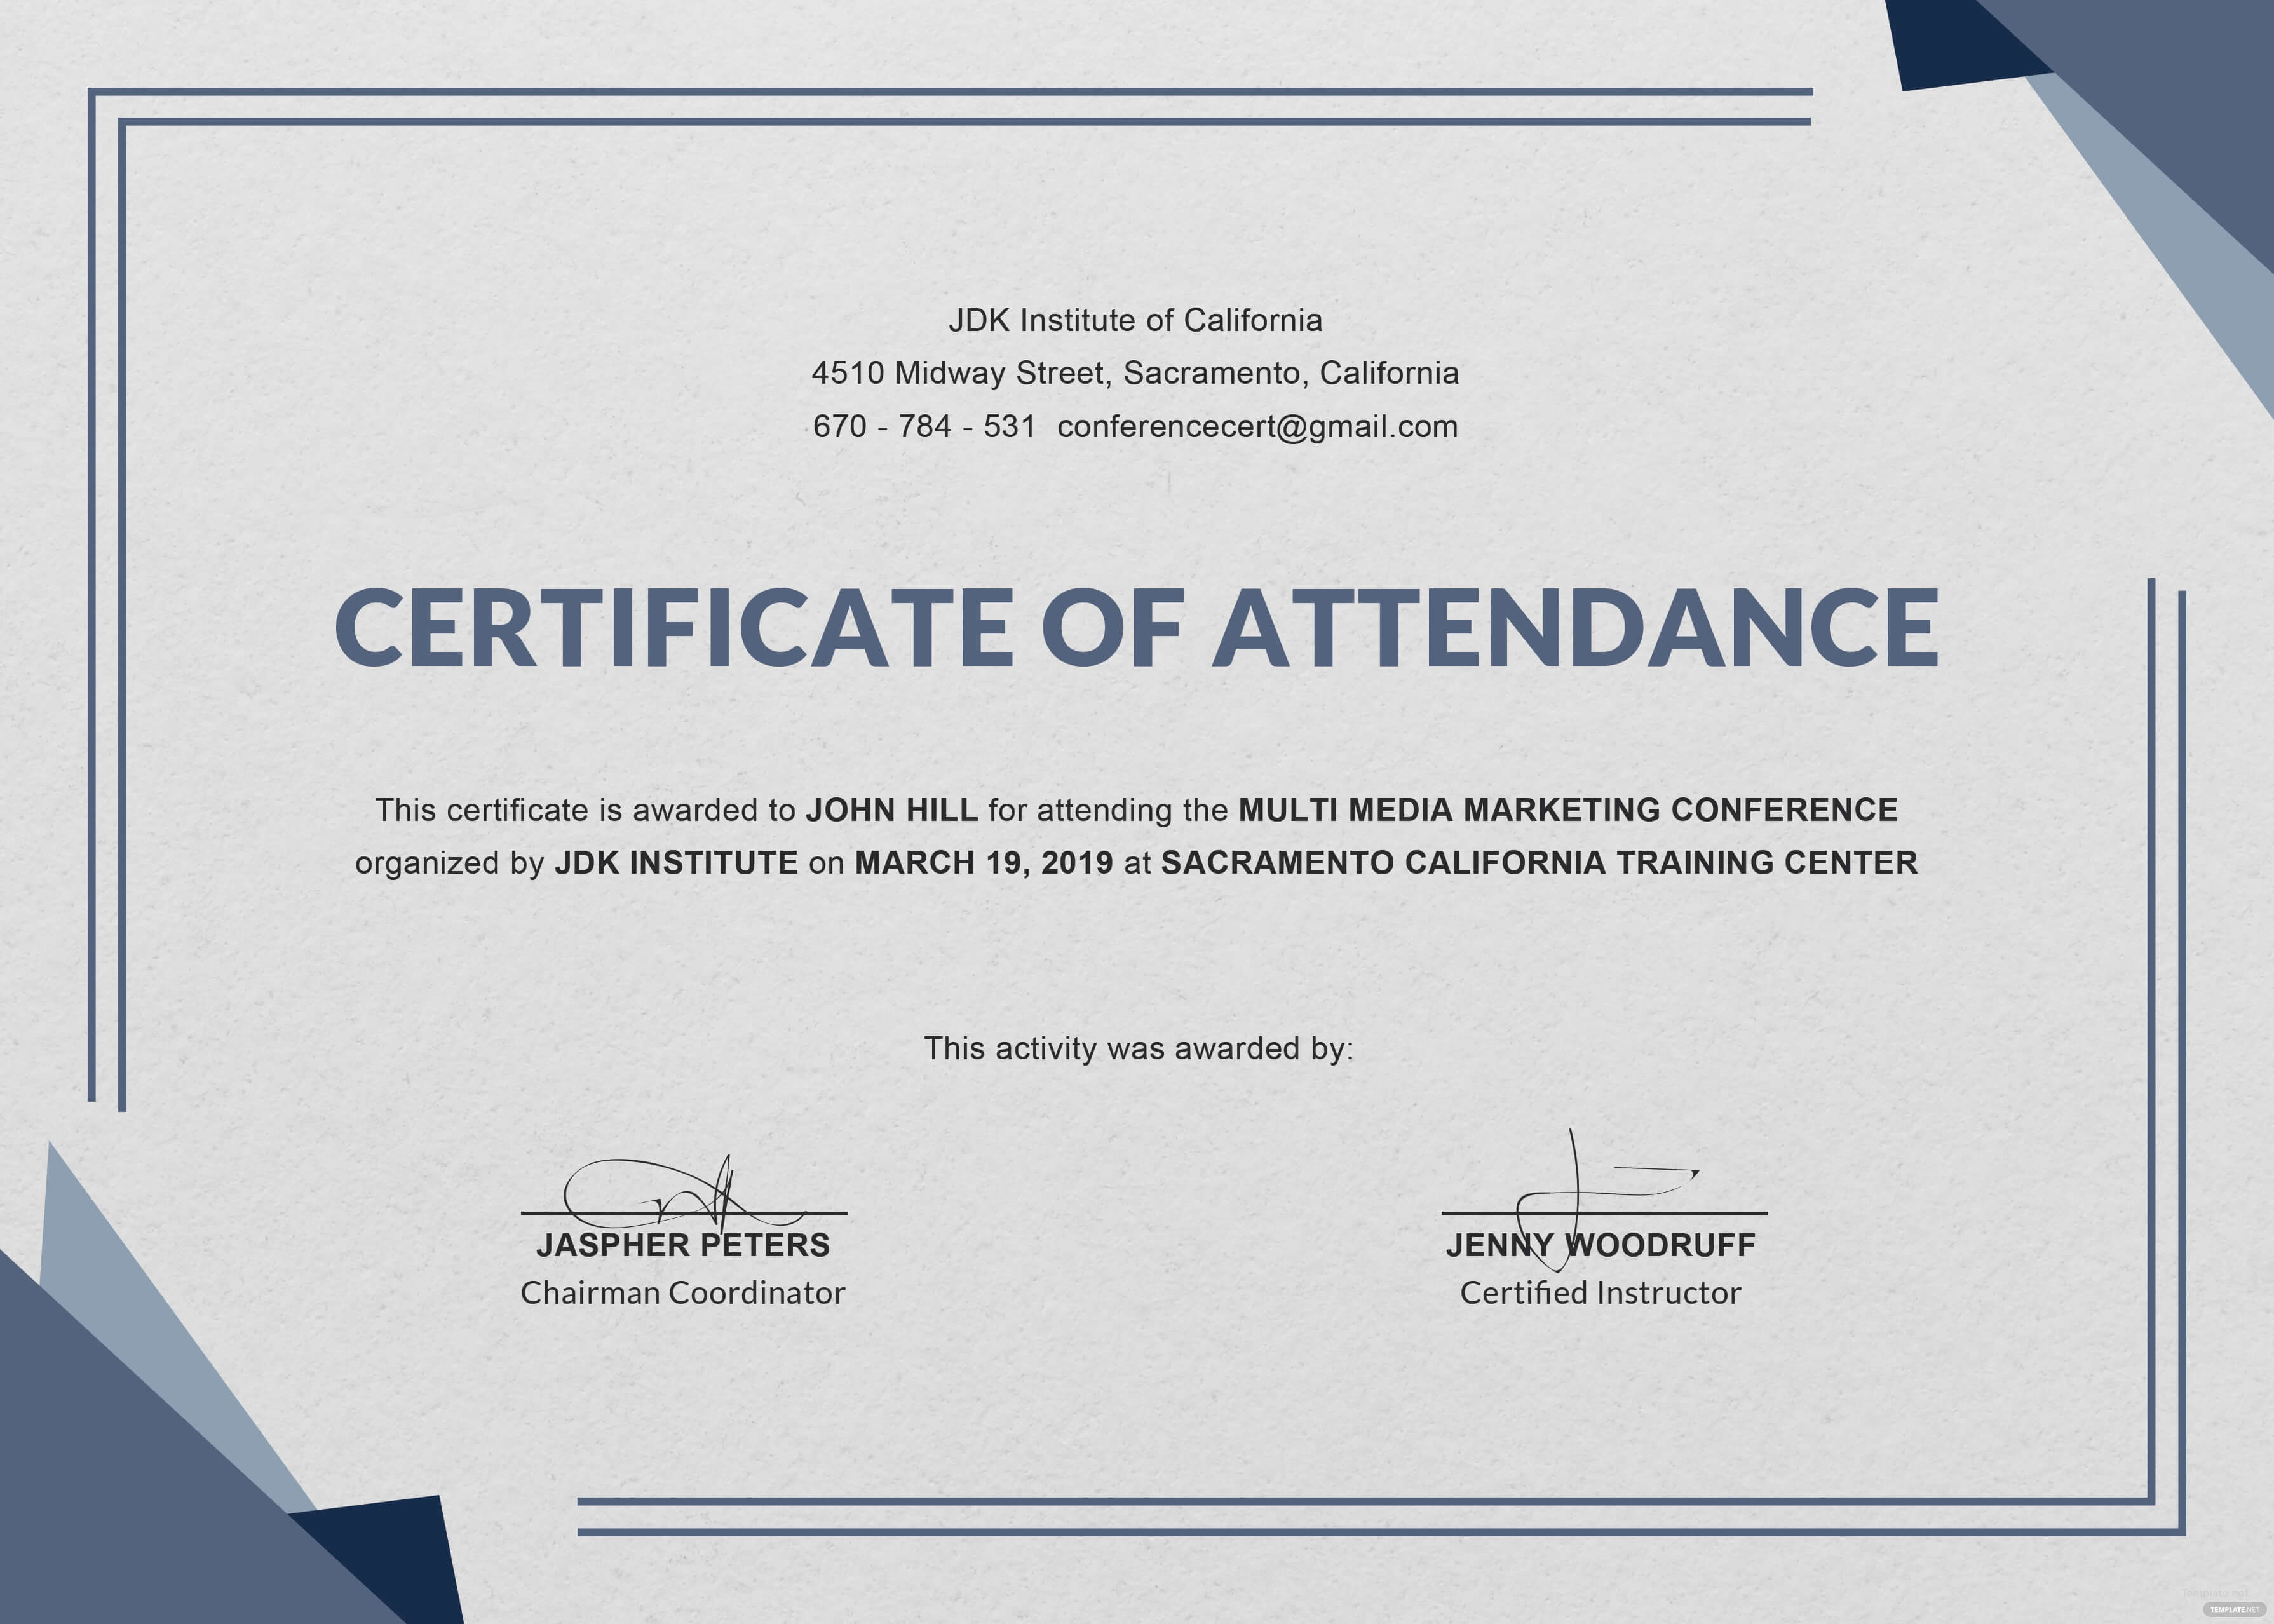 conference certificate of attendance template - Dicim For Conference Certificate Of Attendance Template